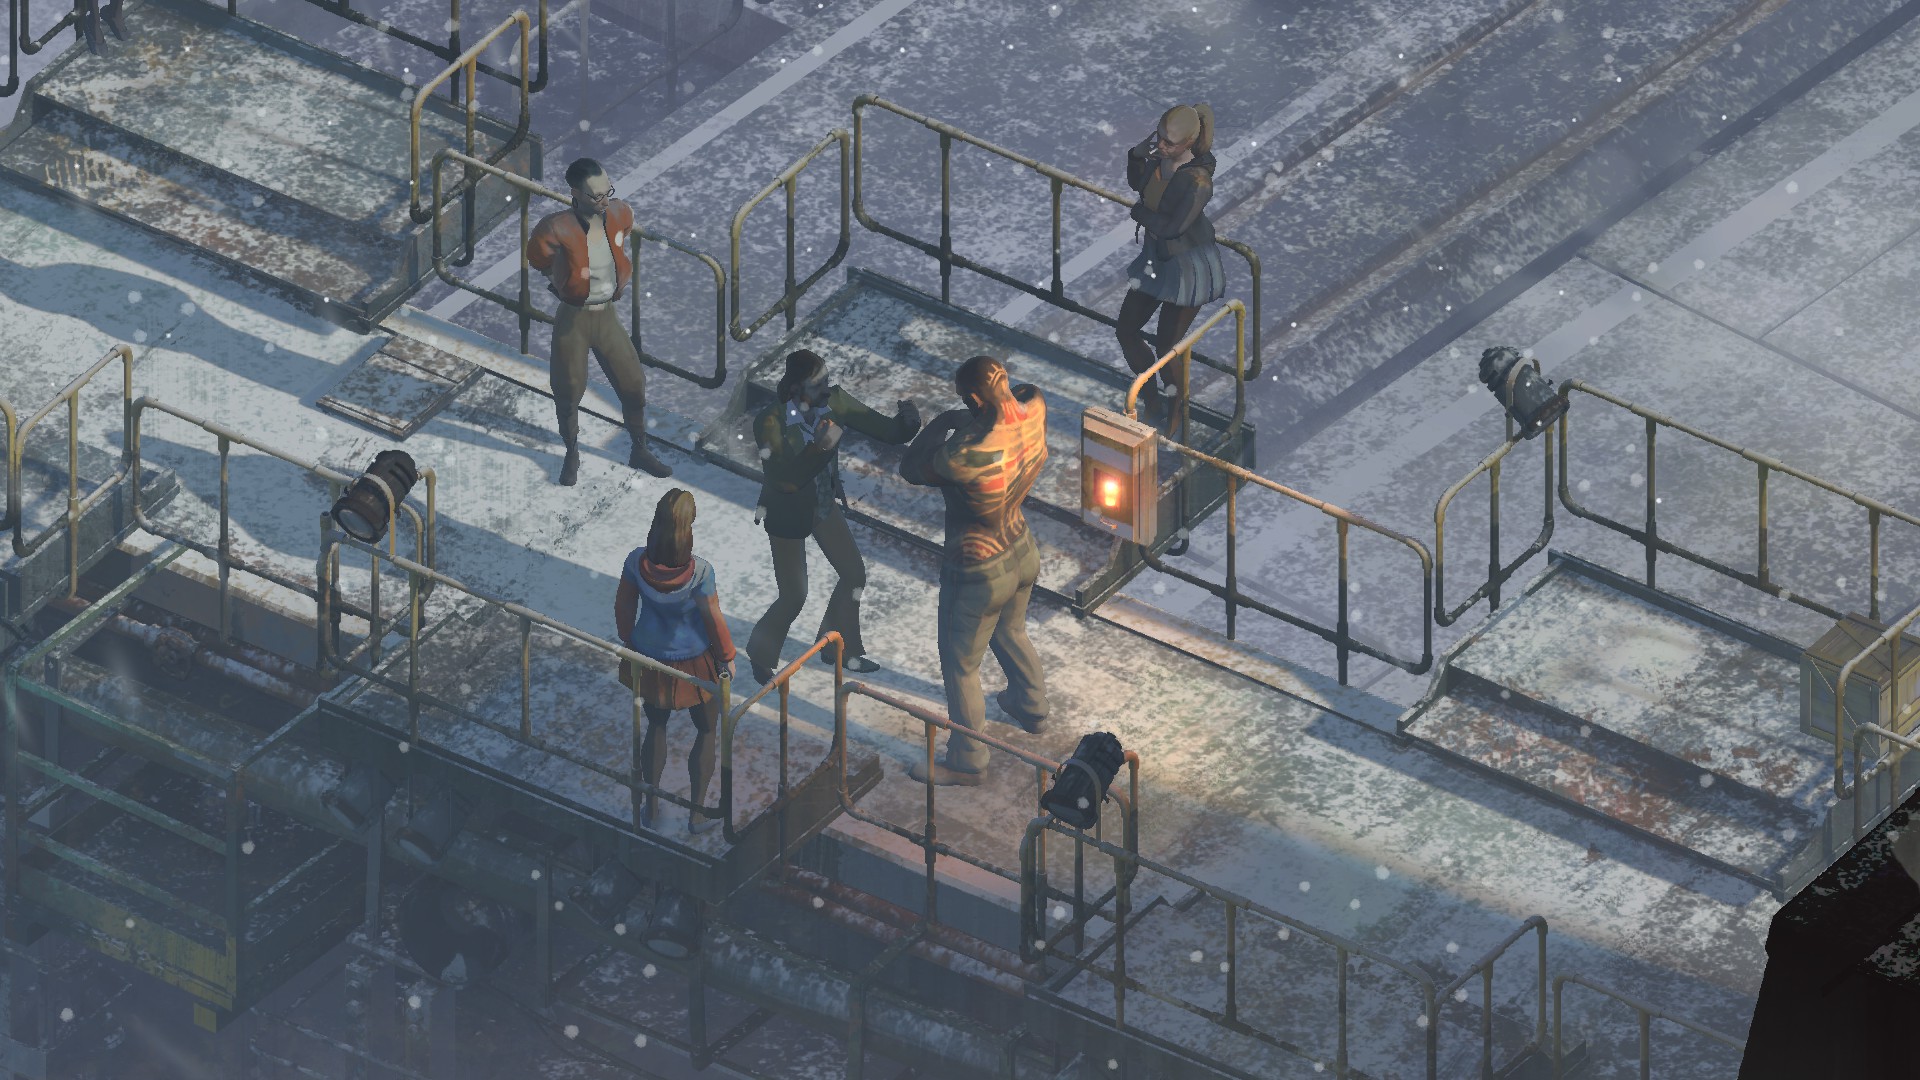 Screenshot from the game Disco Elysium. An isometric view overlooking an industrialized setting as a group of figures stand around. Two of the figures stand in the center of the frame caught within a confrontational stance.